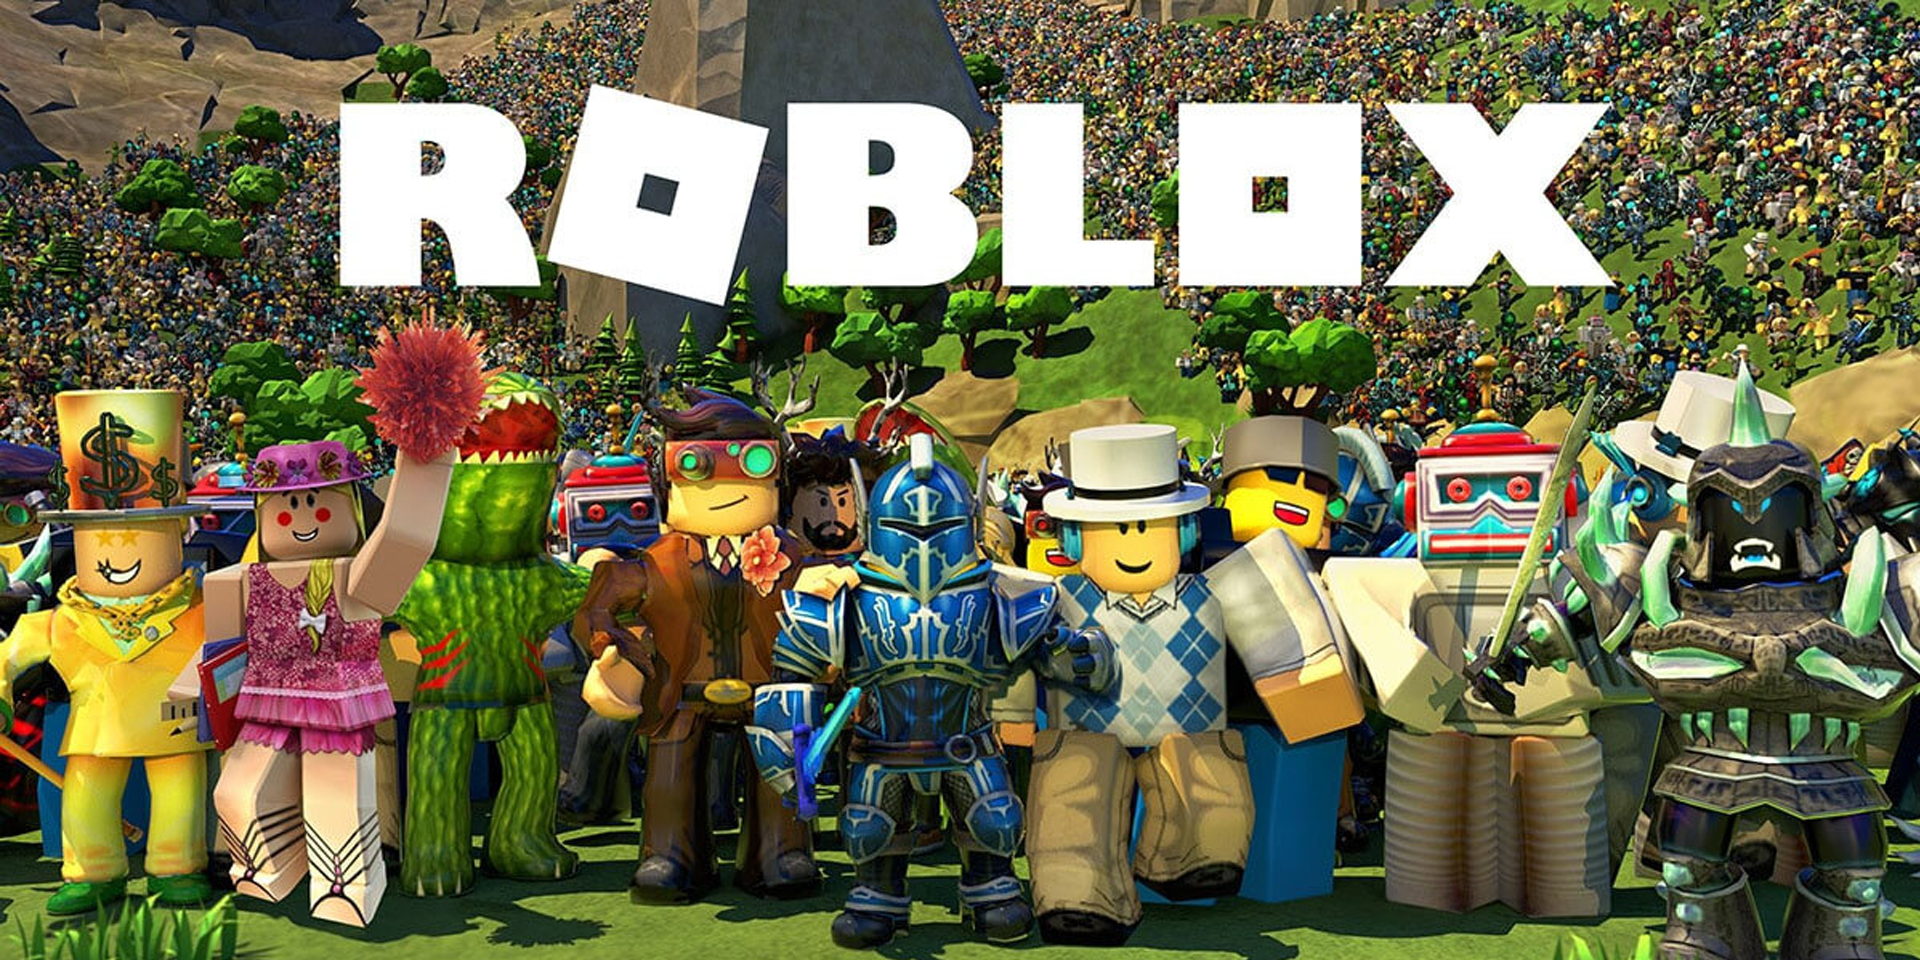 Roblox company is worth £28.5 billion – more than EA, Ubisoft or 2K